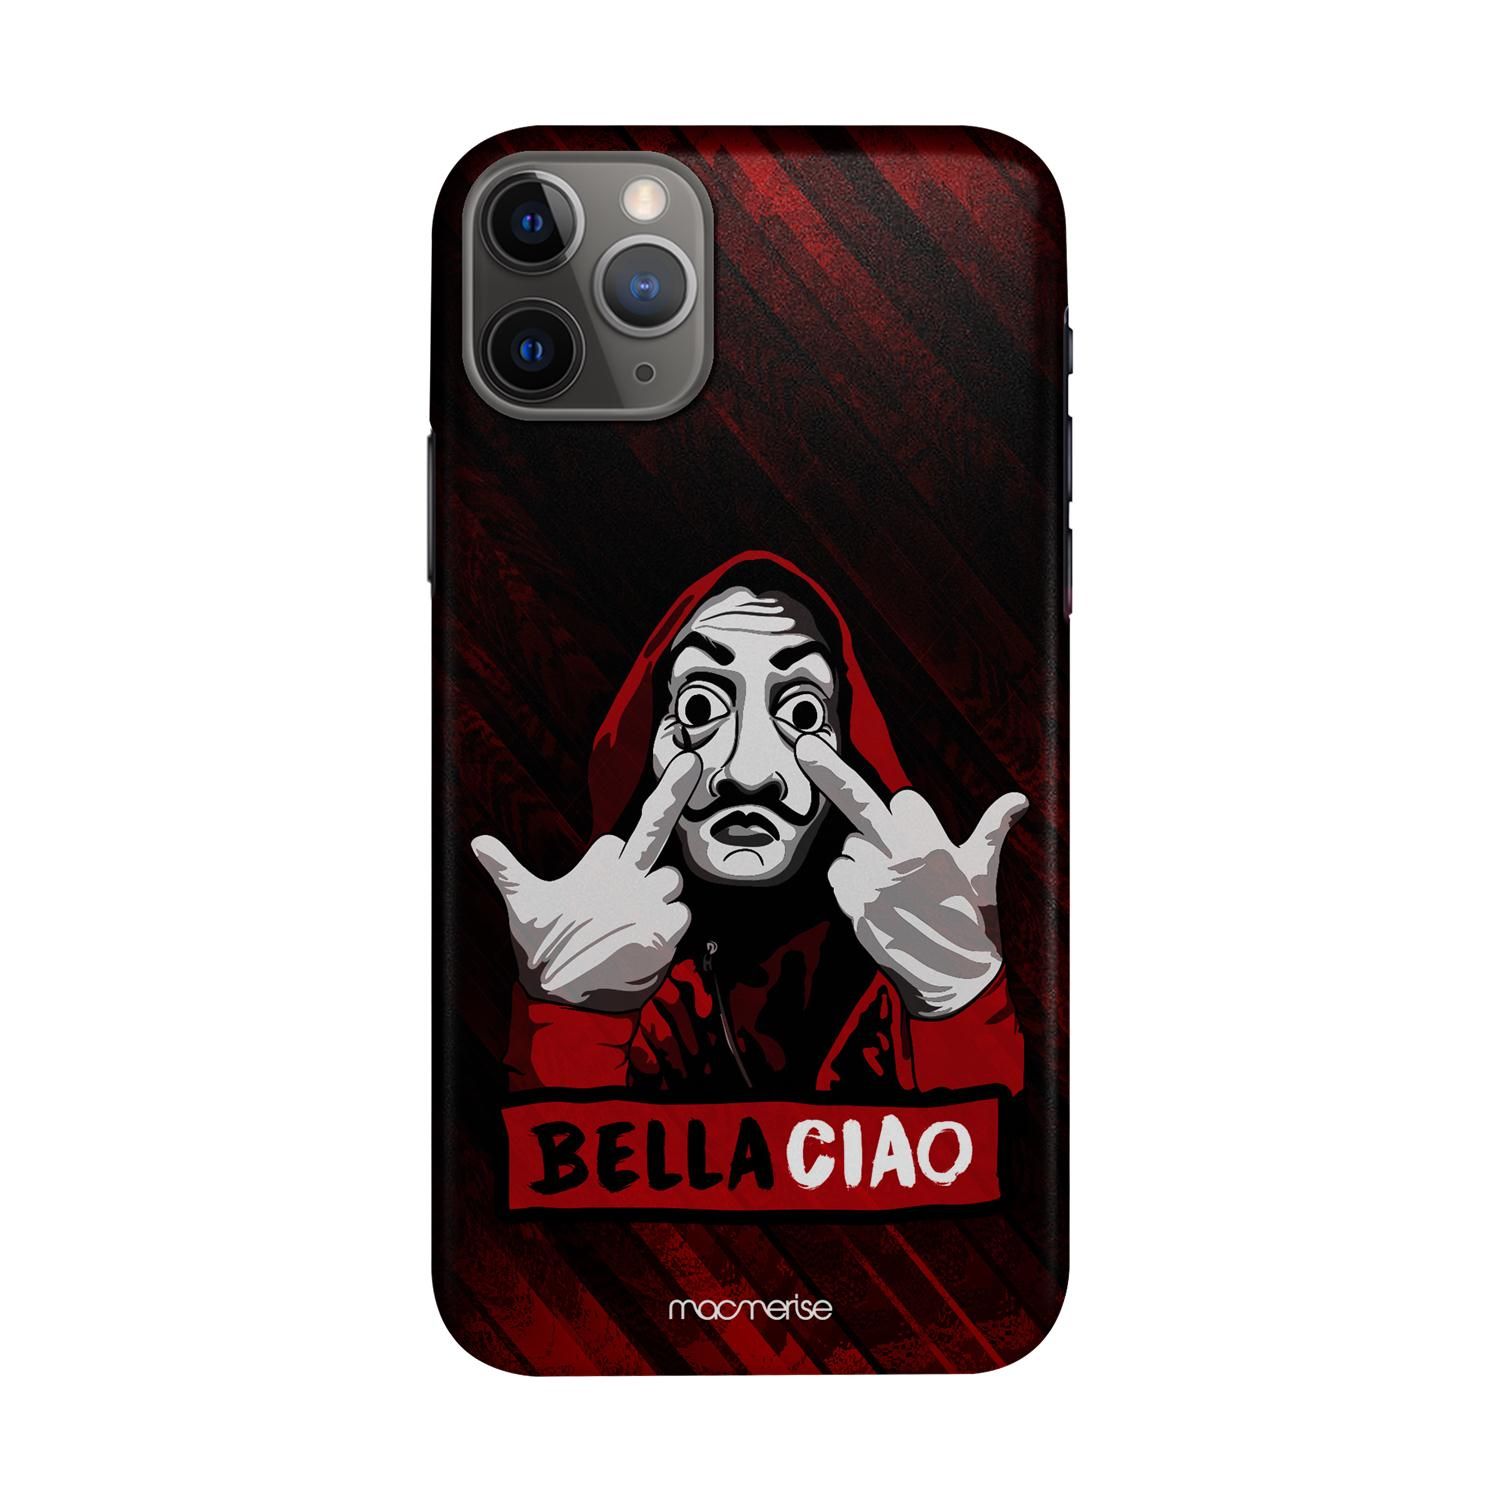 Buy Bella Ciao - Sleek Phone Case for iPhone 11 Pro Max Online